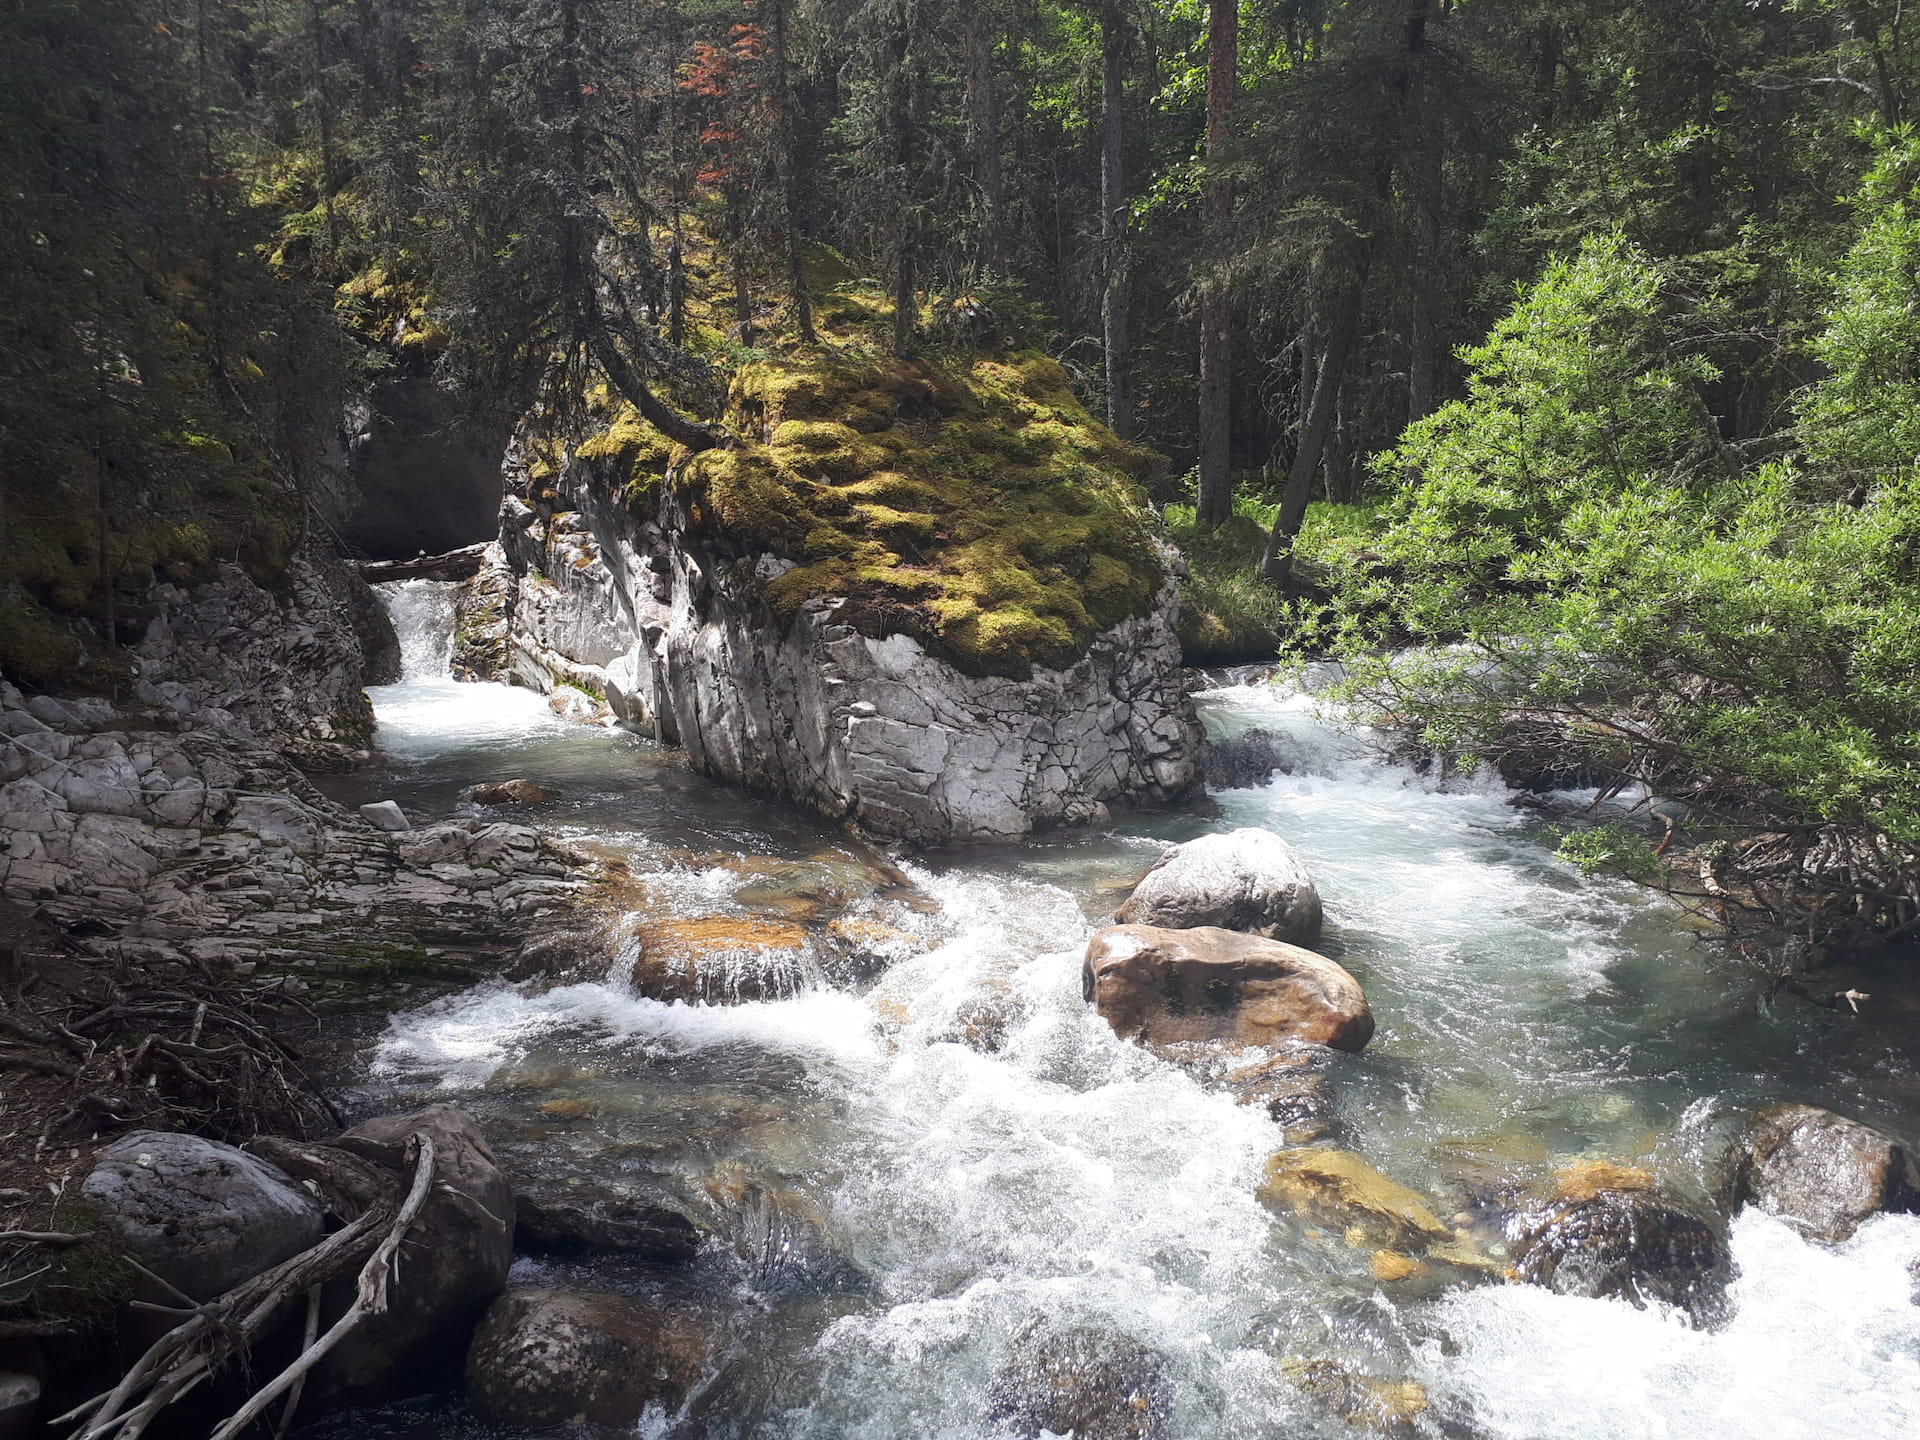 A view of Galatea creek from a point along the easy hike near Calgary. The water is rushing around a stone island in the forest. It's very green.